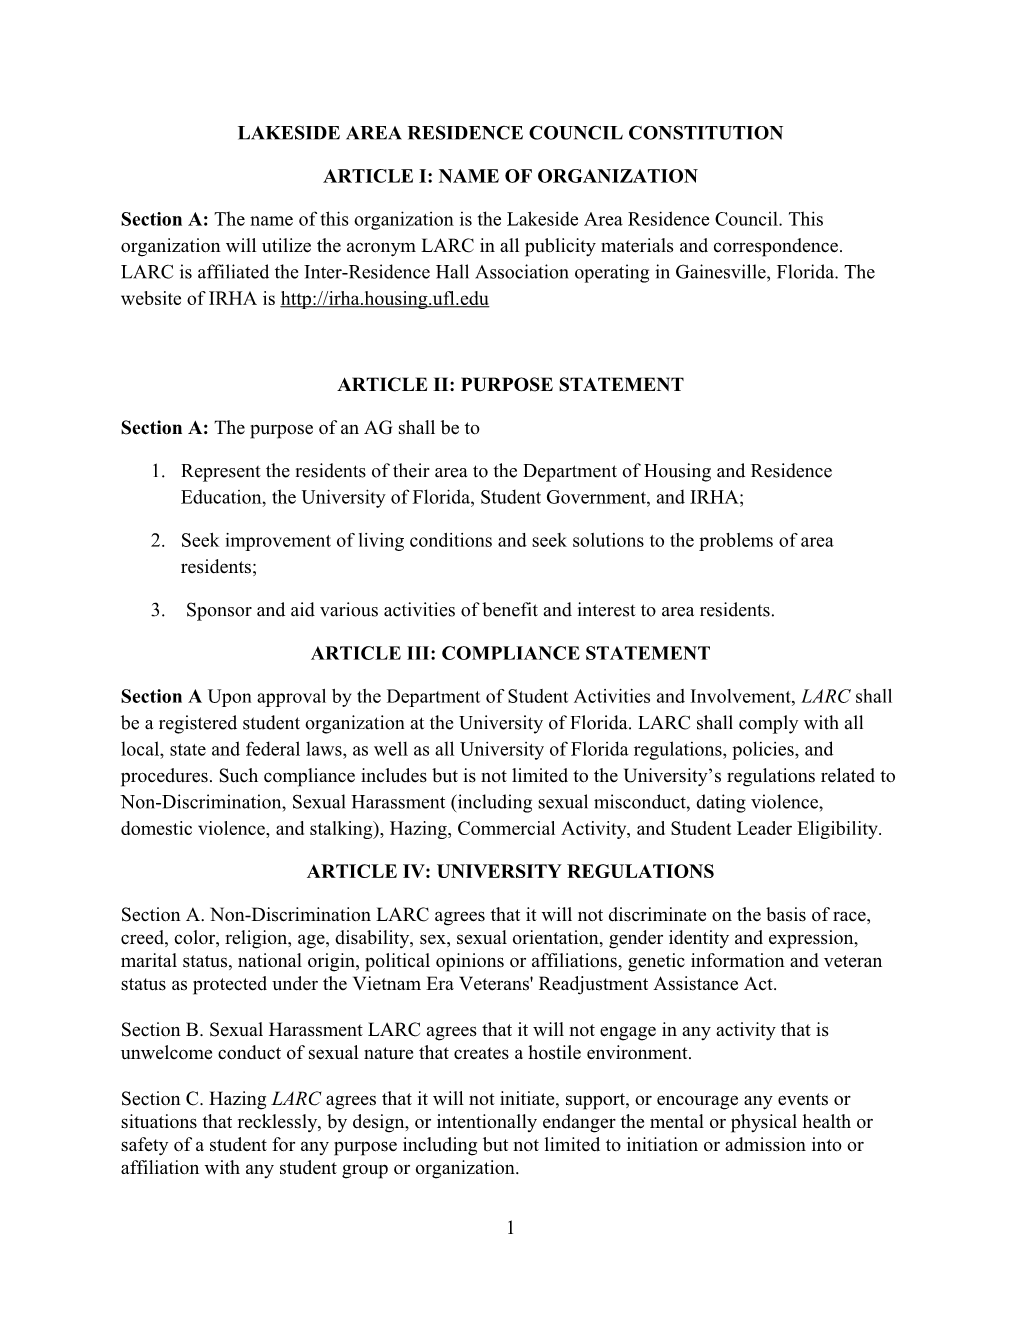 Lakeside Area Residence Council Constitution